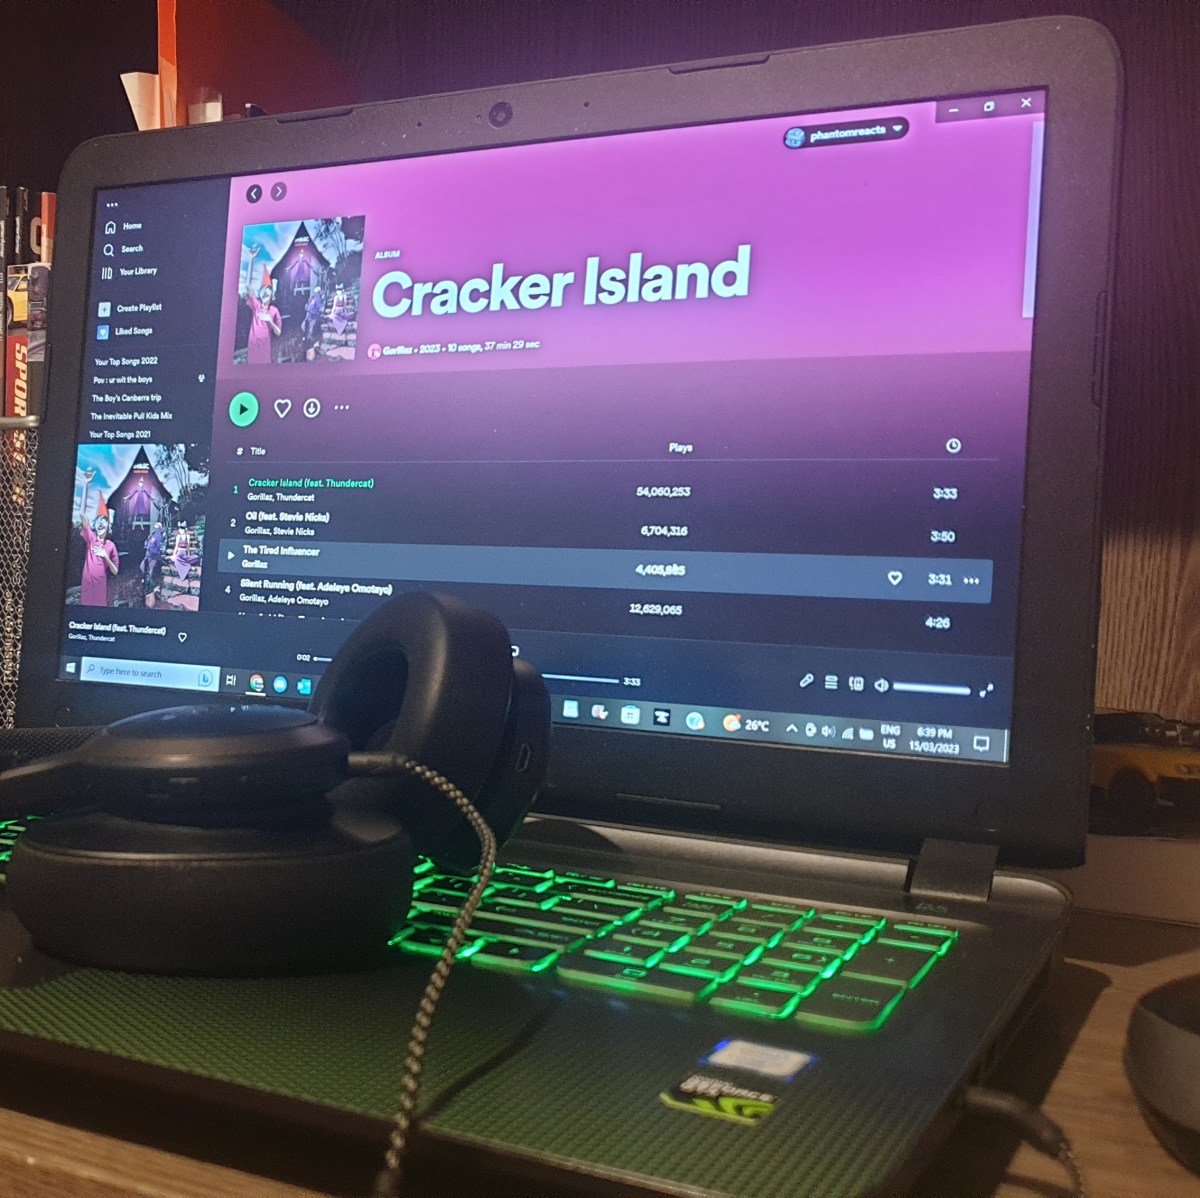 Image of the Cracker Island album on Spotify on a laptop